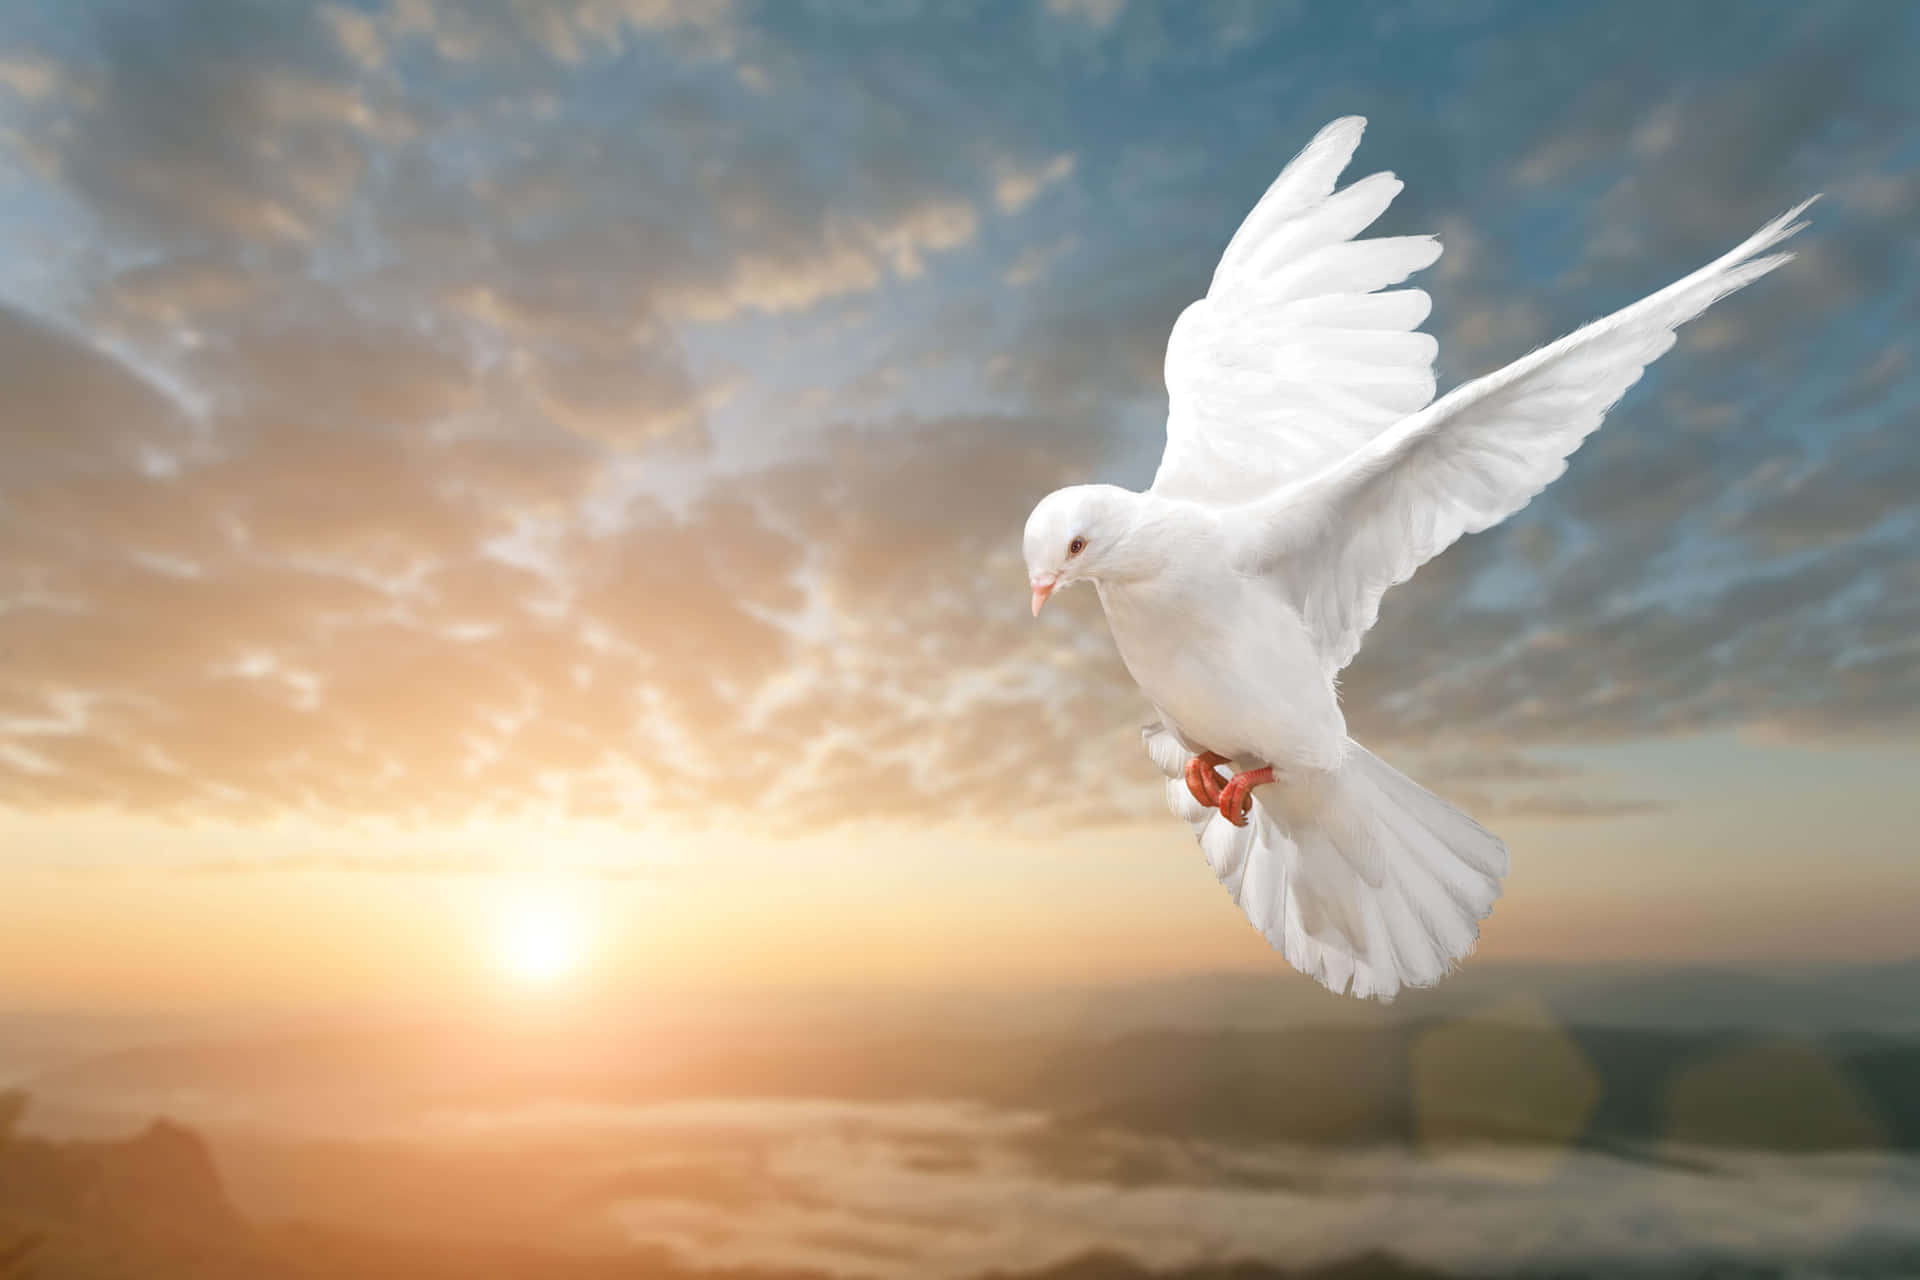 White Dove Flying Over The Mountains At Sunset